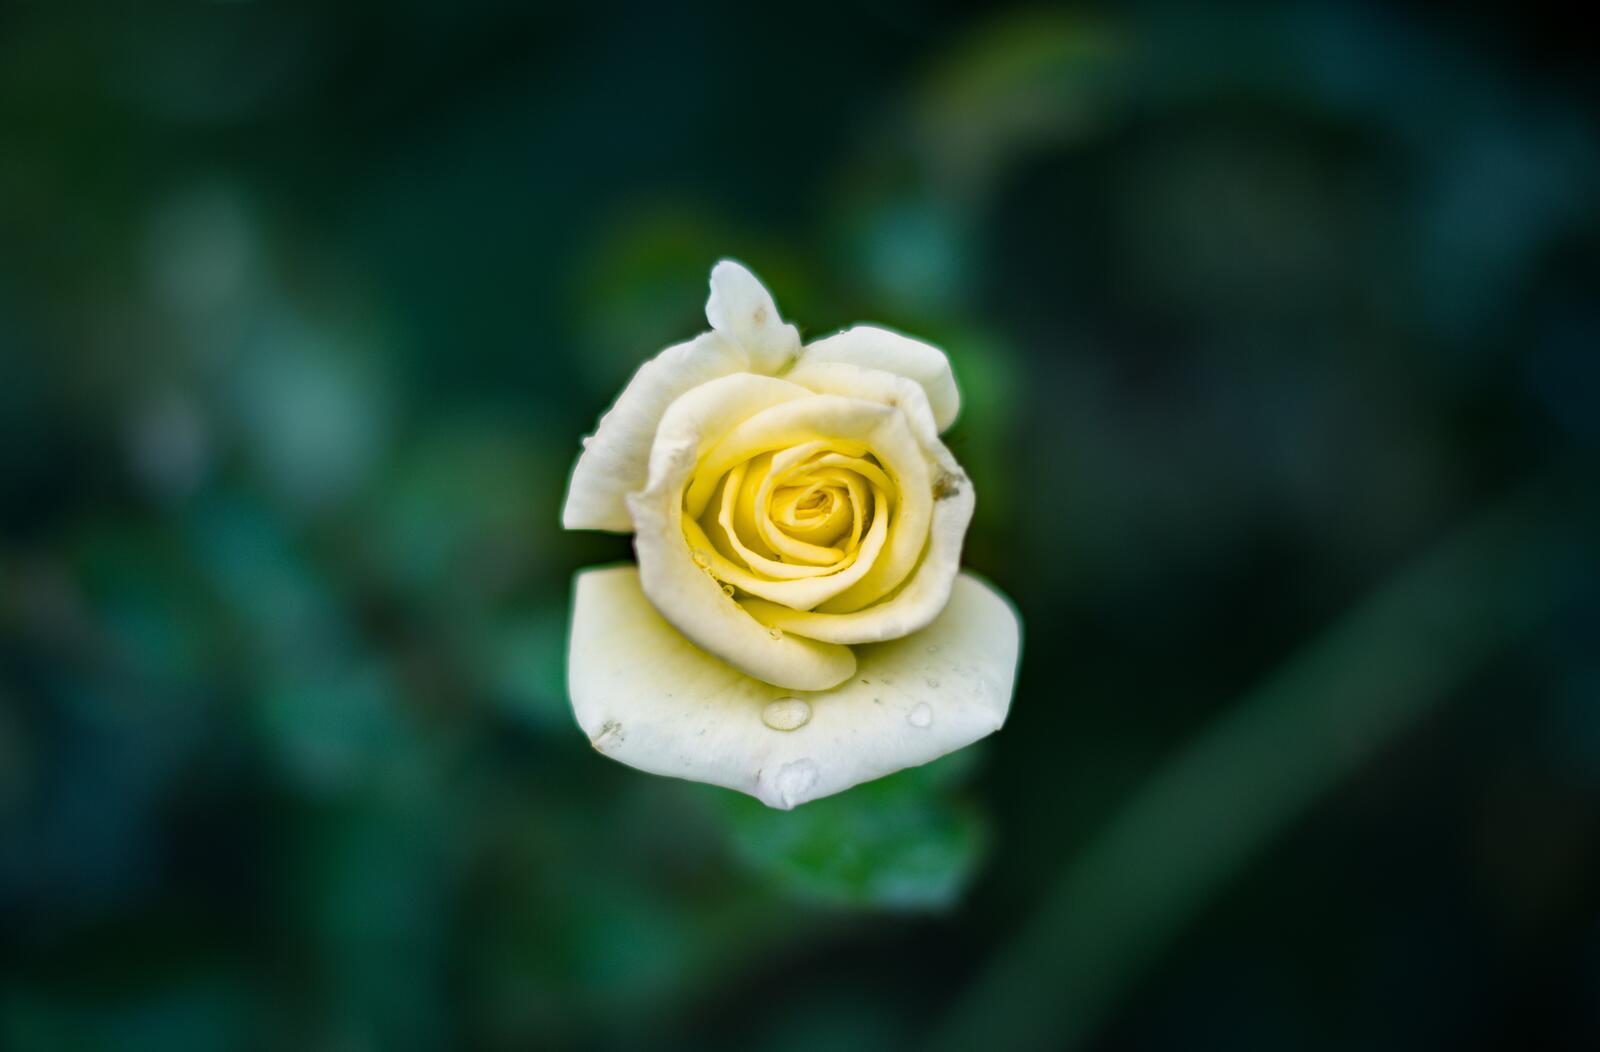 Free photo A single yellow rose with water drops